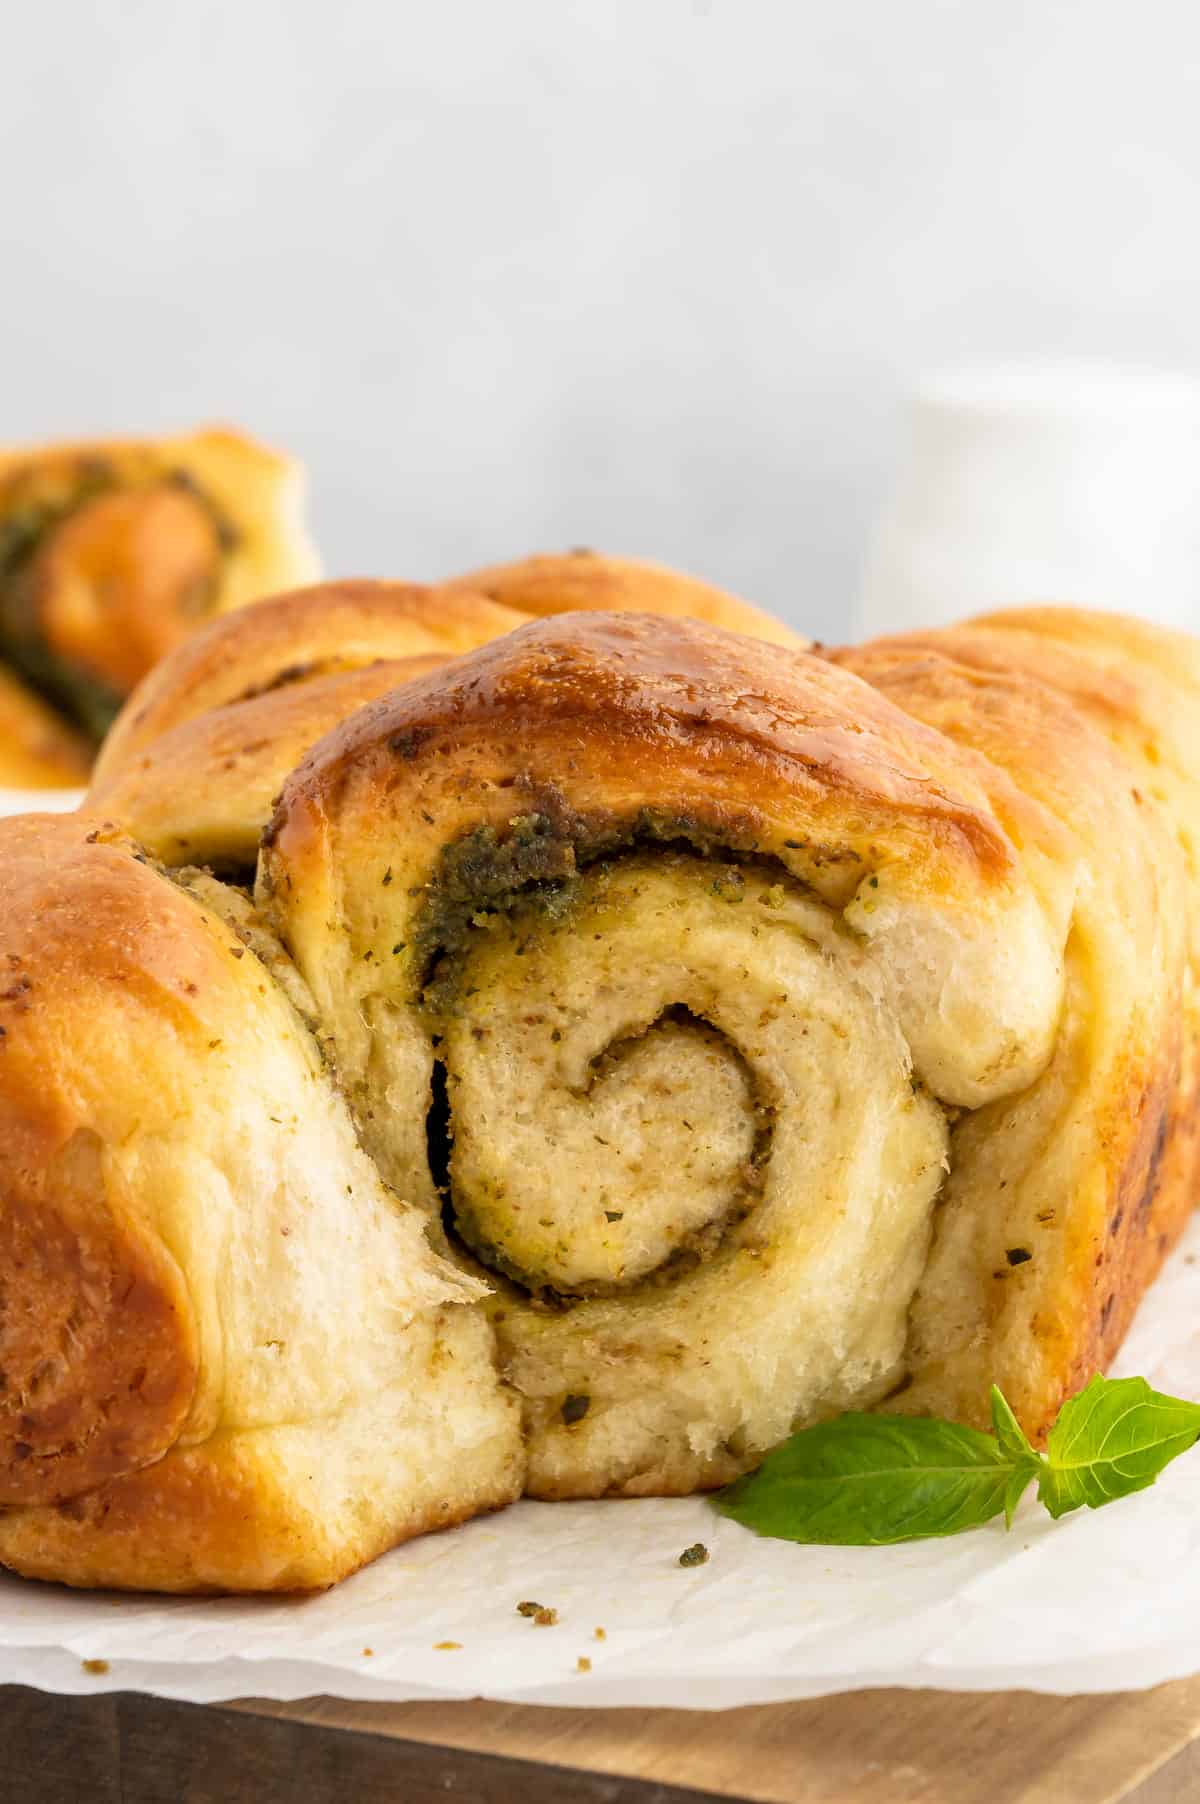 A piece of pesto bread, shot from the side to show the interior swirl pattern.